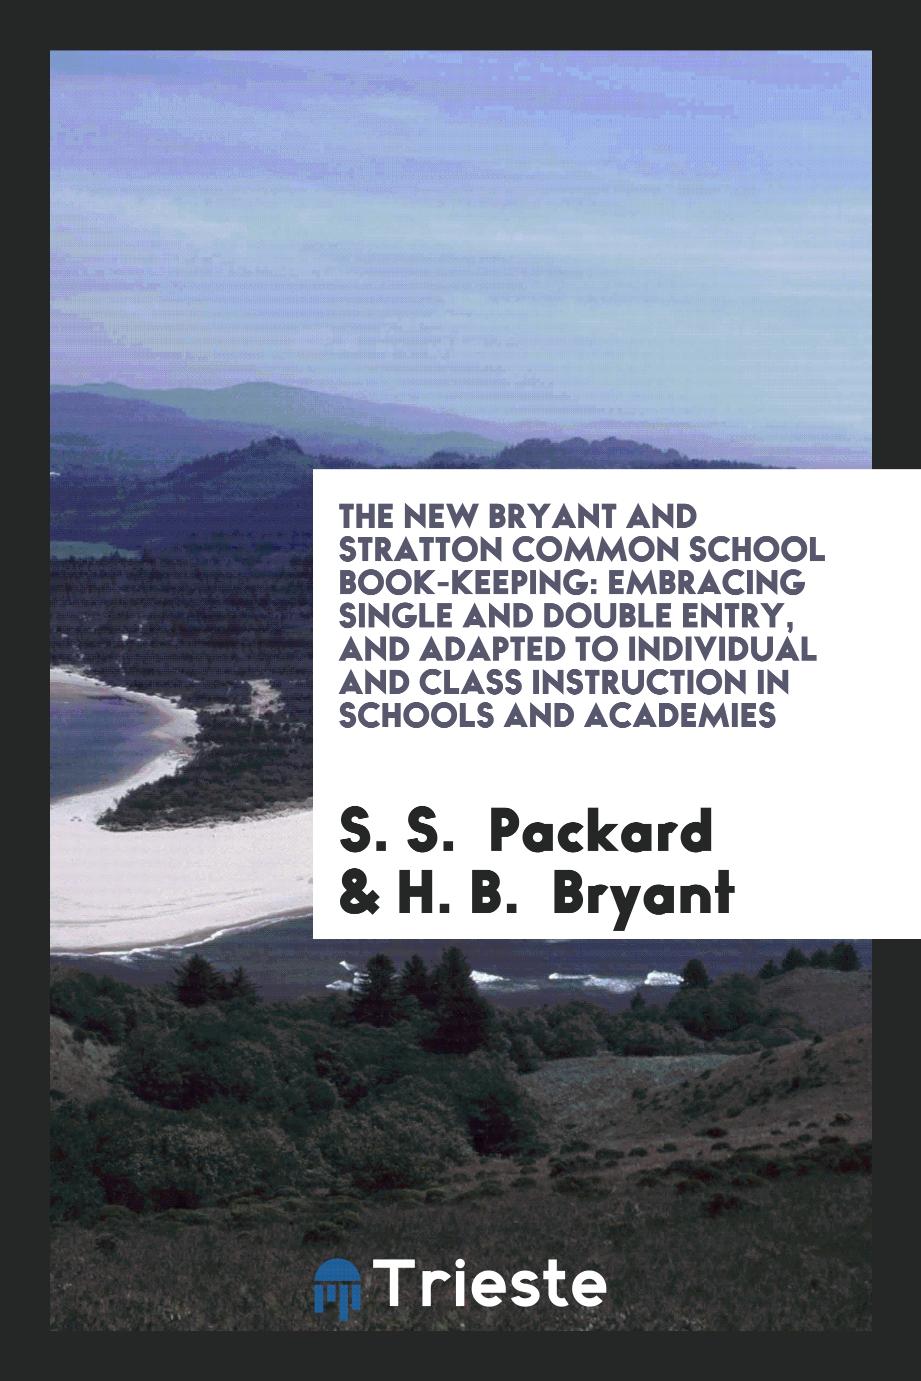 The New Bryant and Stratton Common School Book-Keeping: Embracing Single and Double Entry, and Adapted to Individual and Class Instruction in Schools and Academies